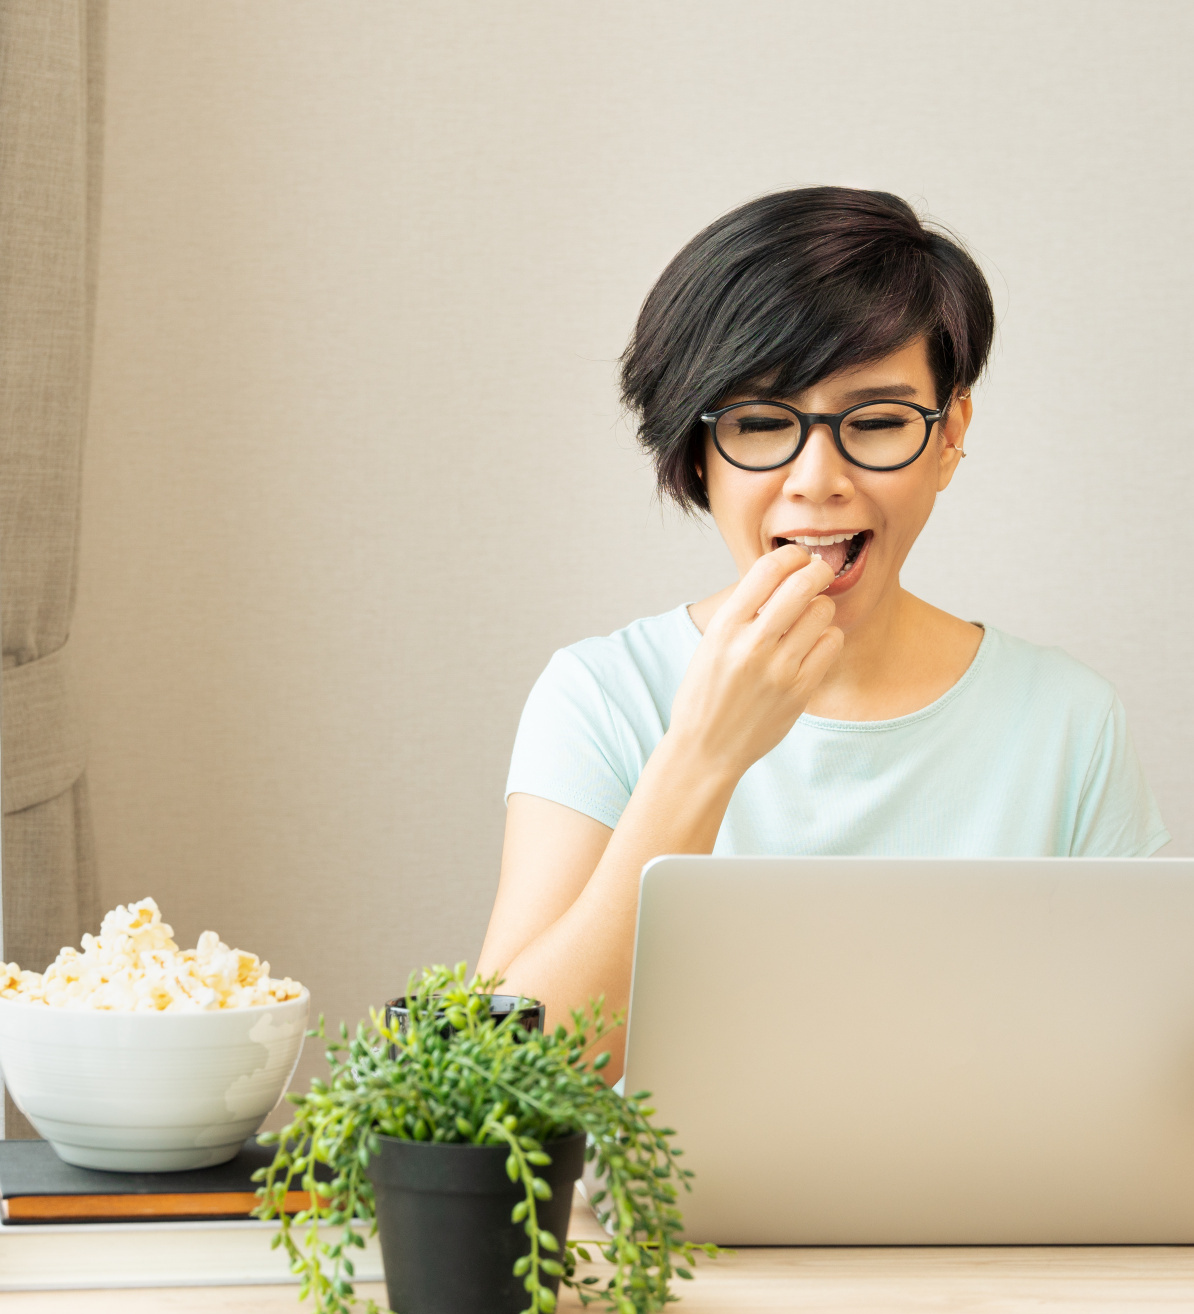 Healthy Snacks Woman eating popcorn while working